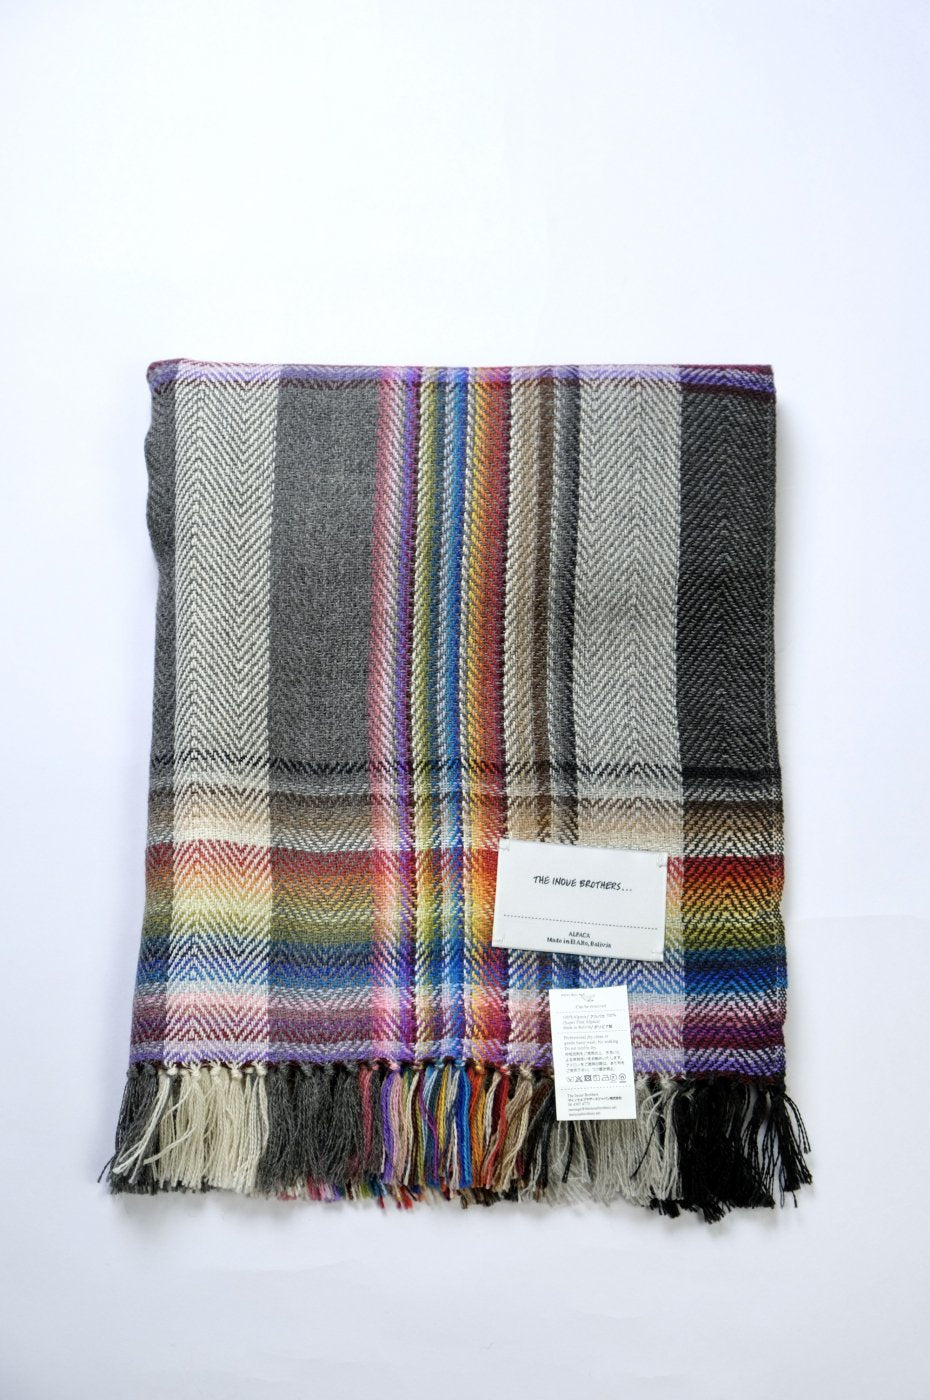 THE INOUE BROTHERS... "Multi Colored Scarf / GRAY"